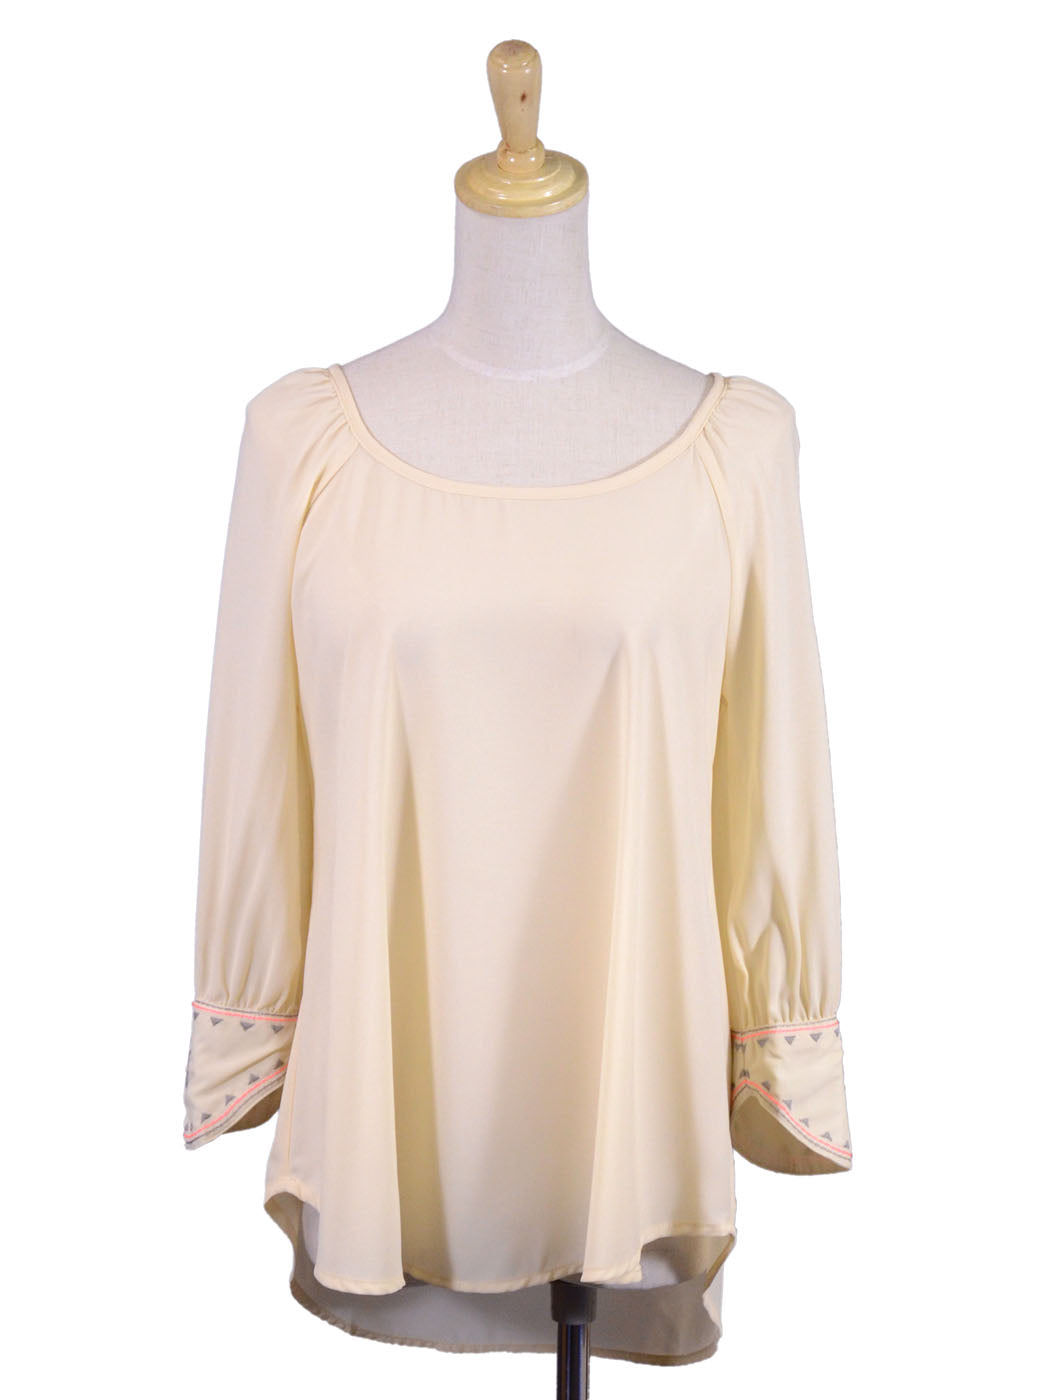 Blu Pepper Beige Long Sleeve Top With Embroidery Sleeve Design